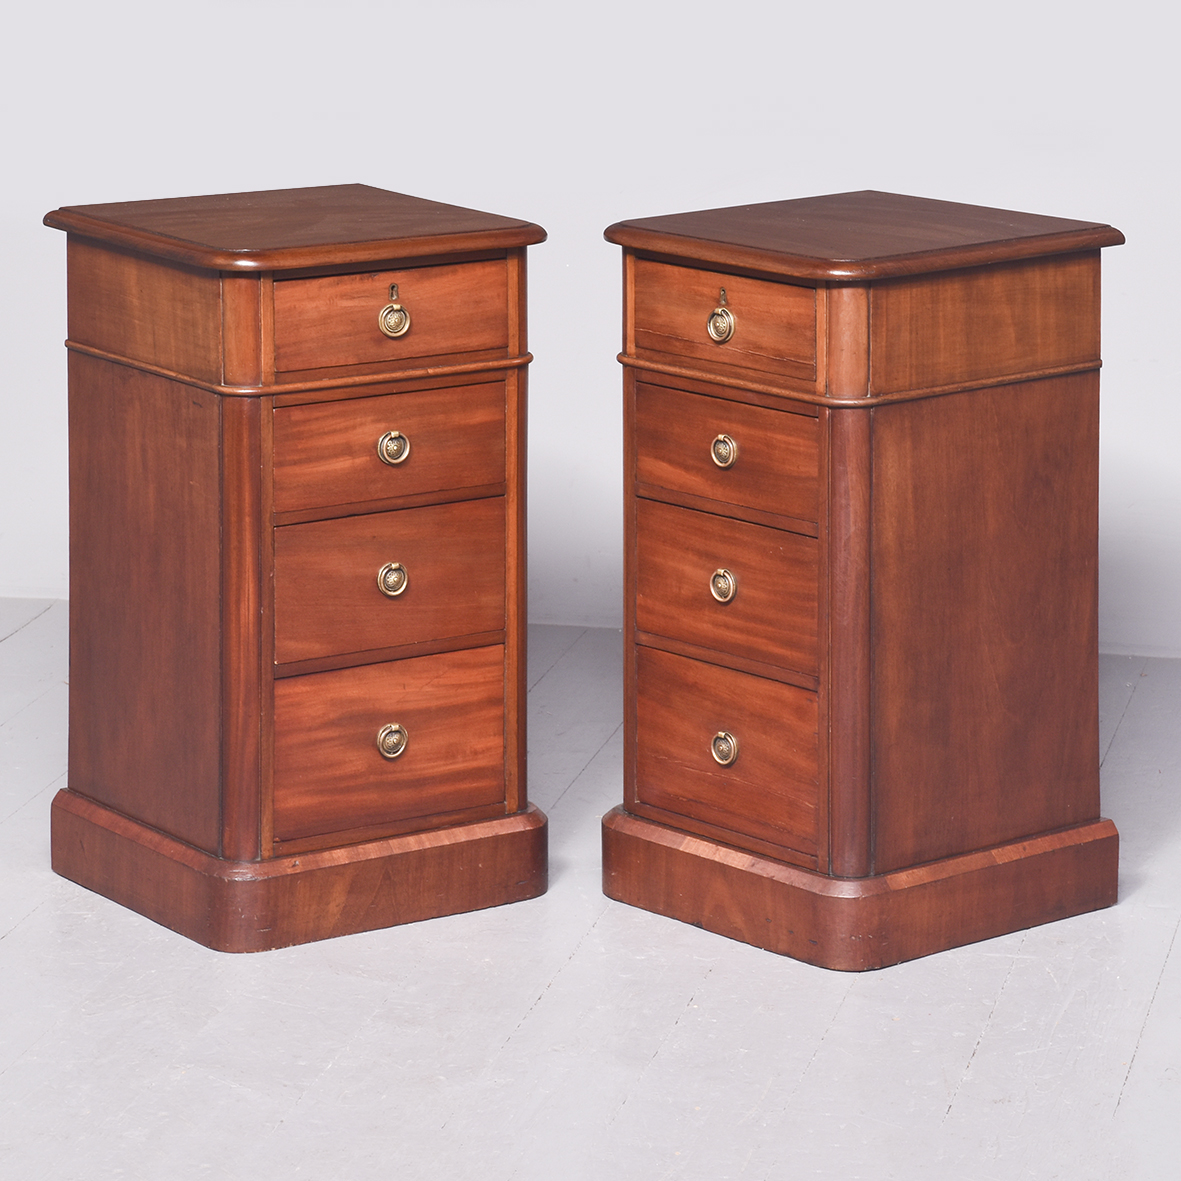 Pair of Mid-Victorian Neat Size Mahogany Chest of Drawers/Bedside Lockers bedside cabinets Antique Chest Of Drawers